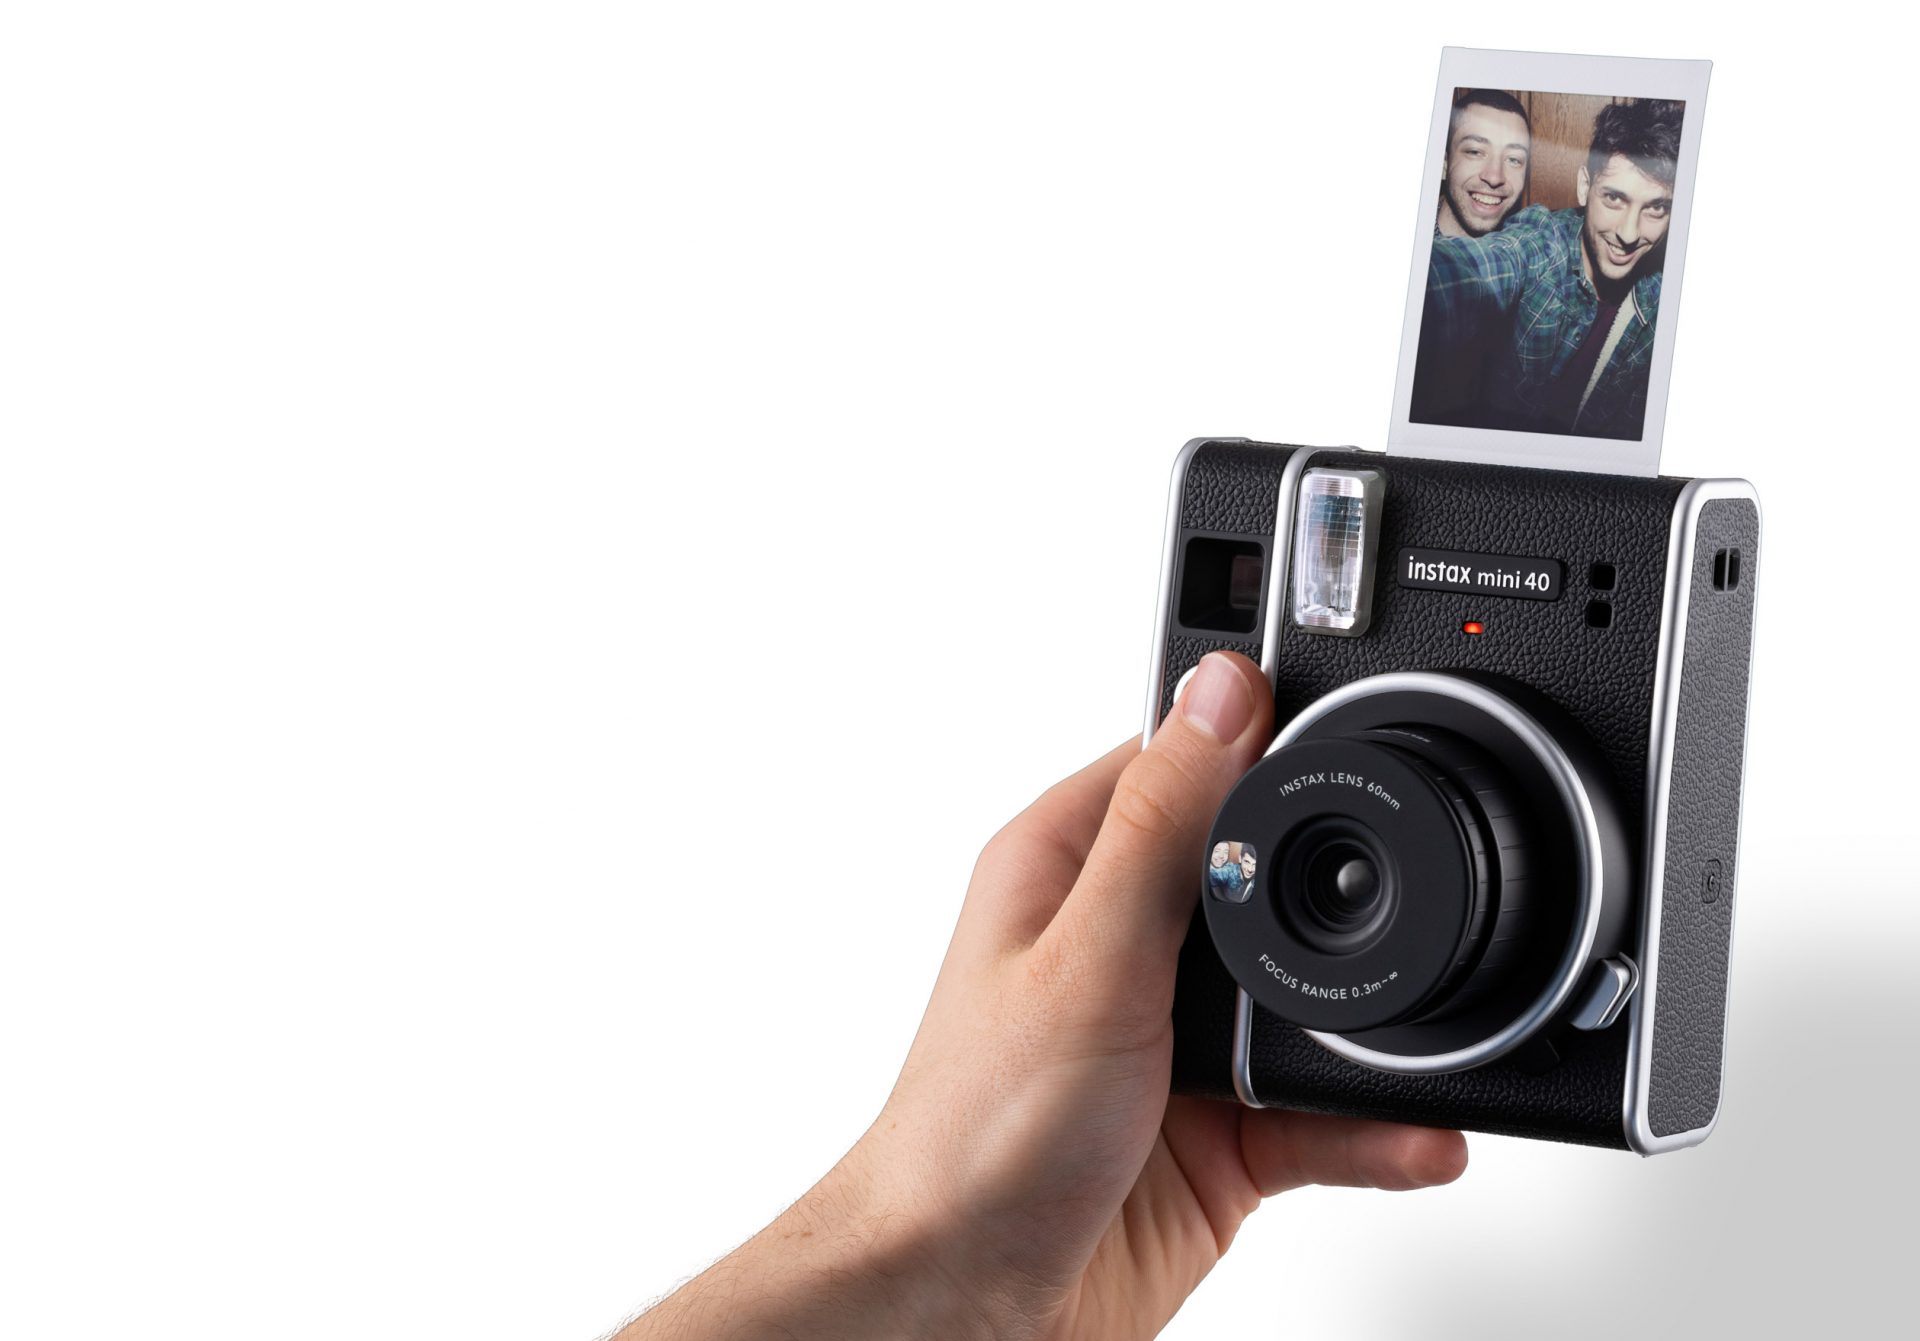 Fujifilm’s $100 Instax Mini 40 provides classic seems to be to be and straightforward aspects